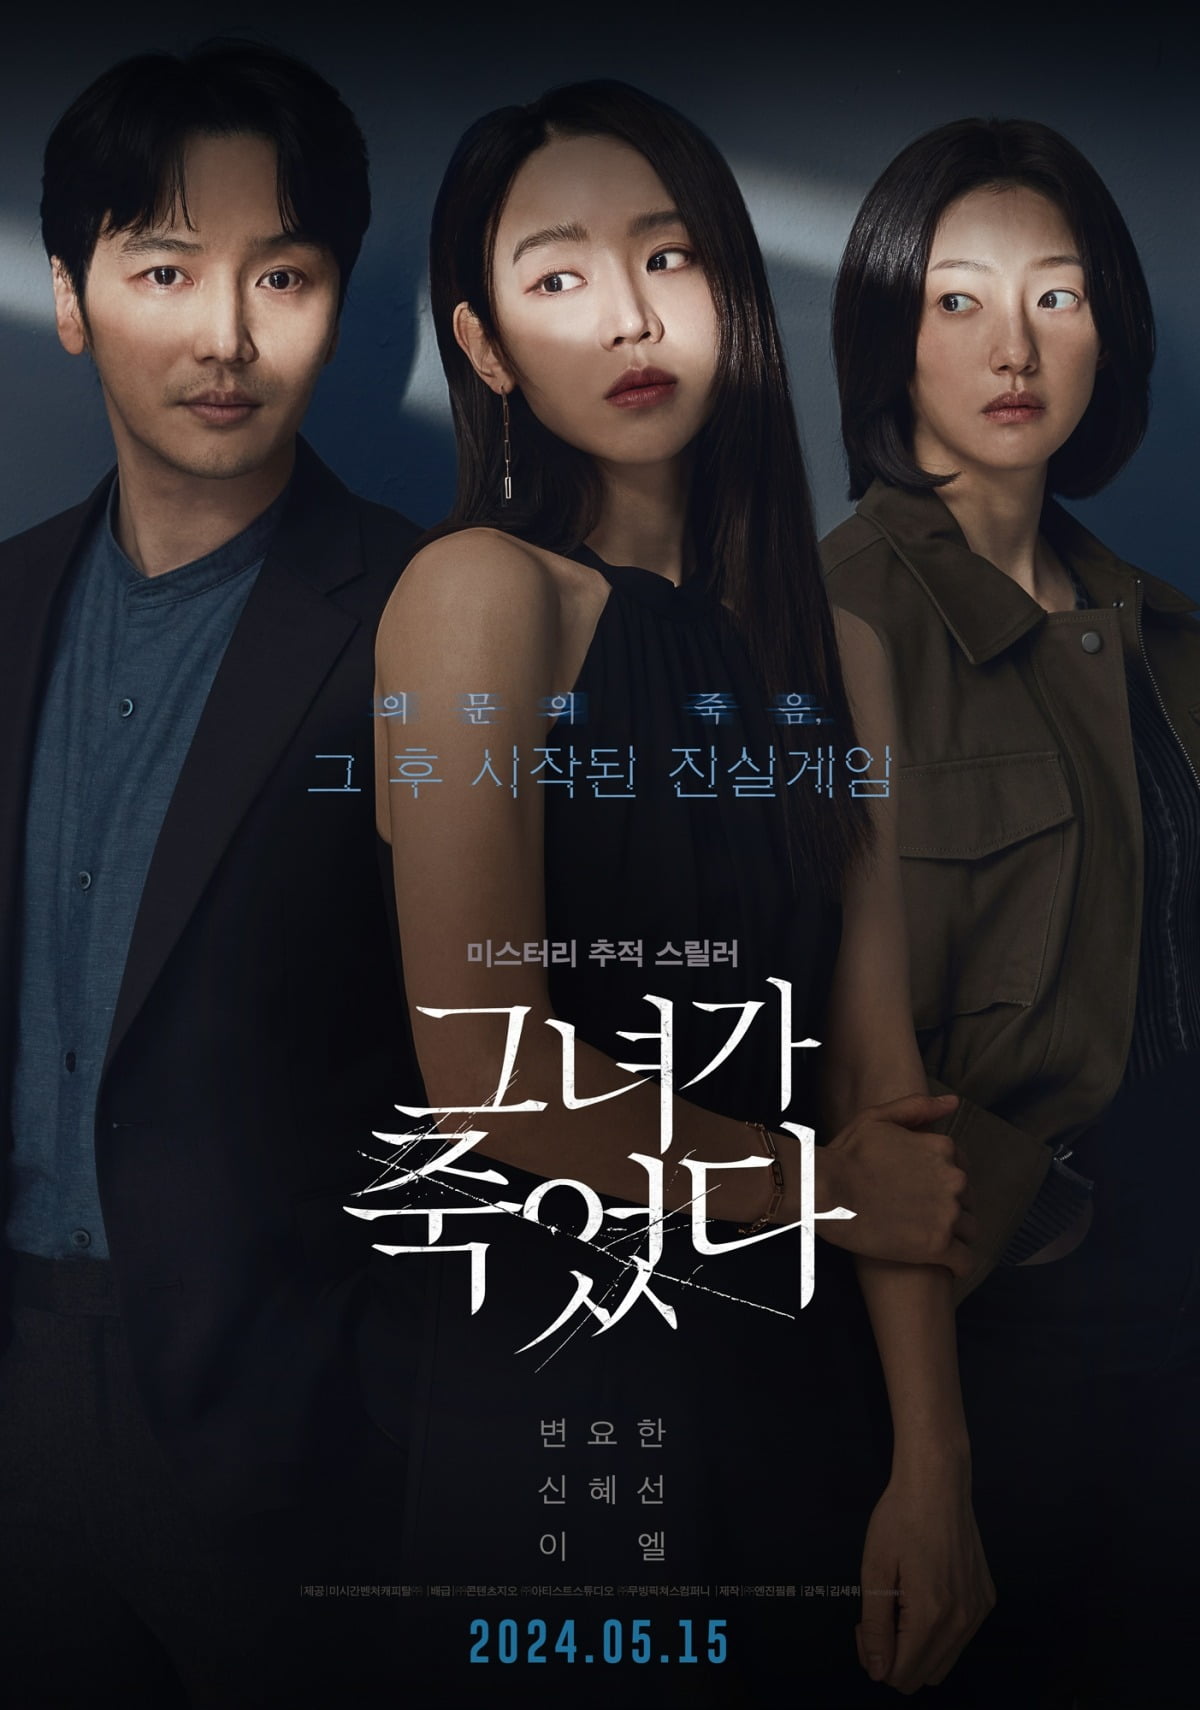 The poster for 'Following' starring Byun Yo-han and Shin Hye-sun has been released.